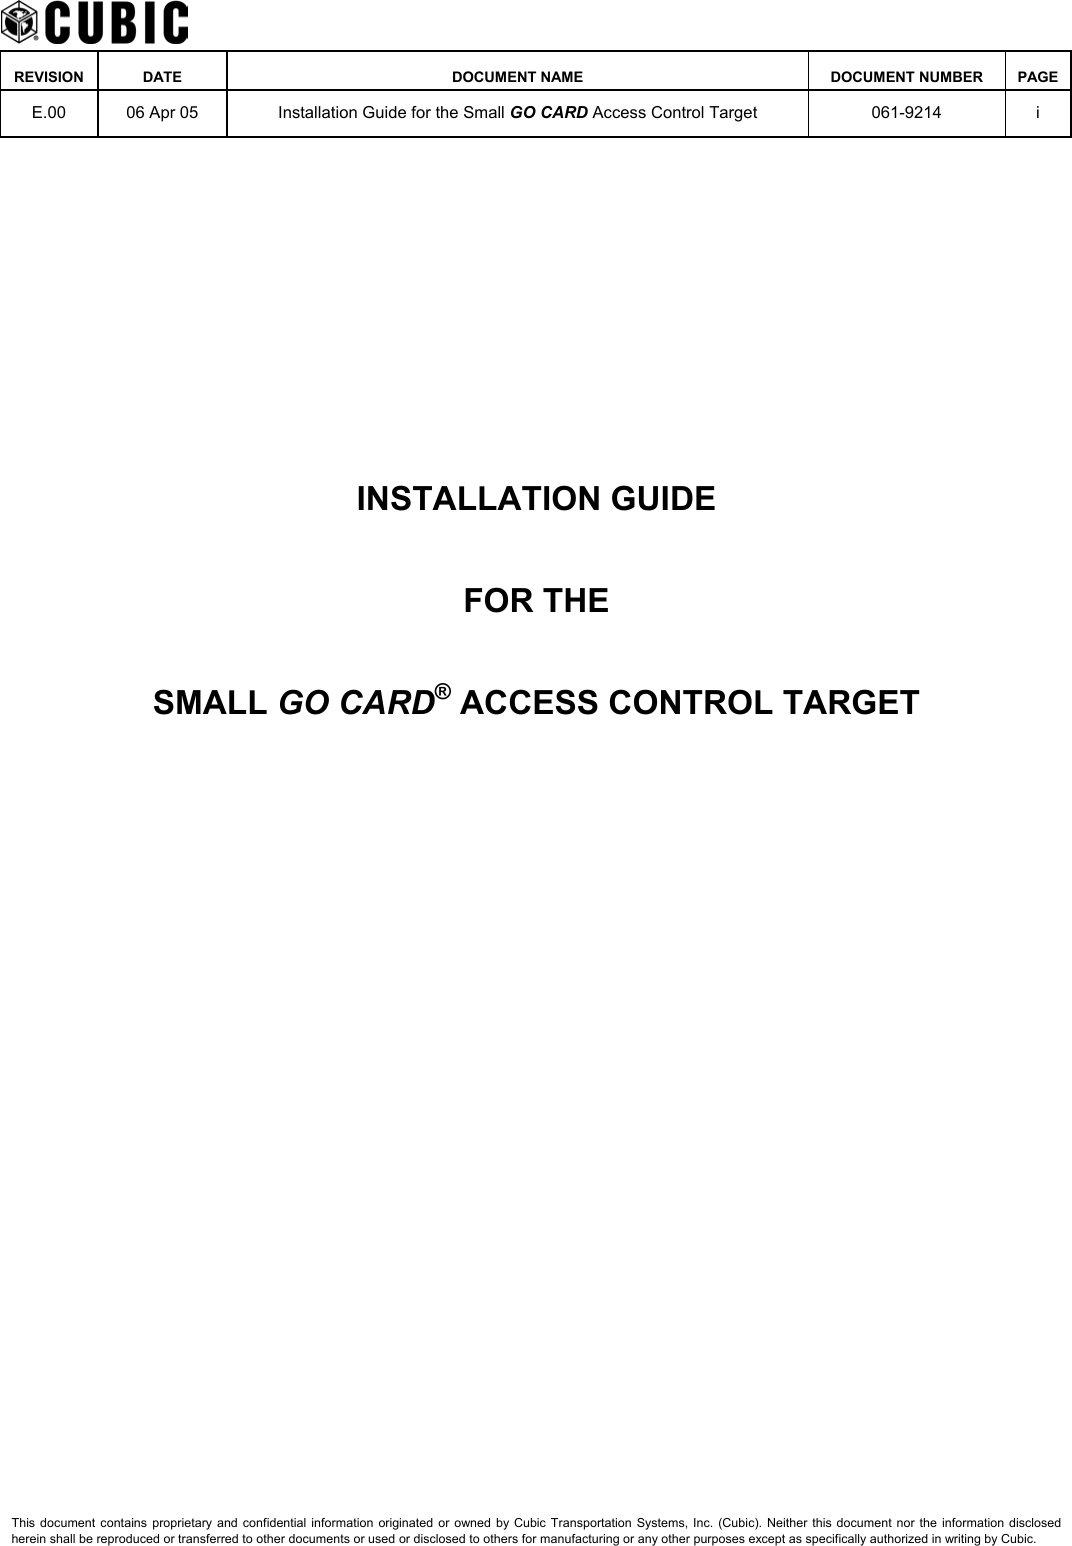    REVISION DATE  DOCUMENT NAME  DOCUMENT NUMBER  PAGE  E.00  06 Apr 05  Installation Guide for the Small GO CARD Access Control Target  061-9214 i        INSTALLATION GUIDE FOR THE SMALL GO CARD® ACCESS CONTROL TARGET   This document contains proprietary and confidential information originated or owned by Cubic Transportation Systems, Inc. (Cubic). Neither this document nor the information disclosed herein shall be reproduced or transferred to other documents or used or disclosed to others for manufacturing or any other purposes except as specifically authorized in writing by Cubic. 